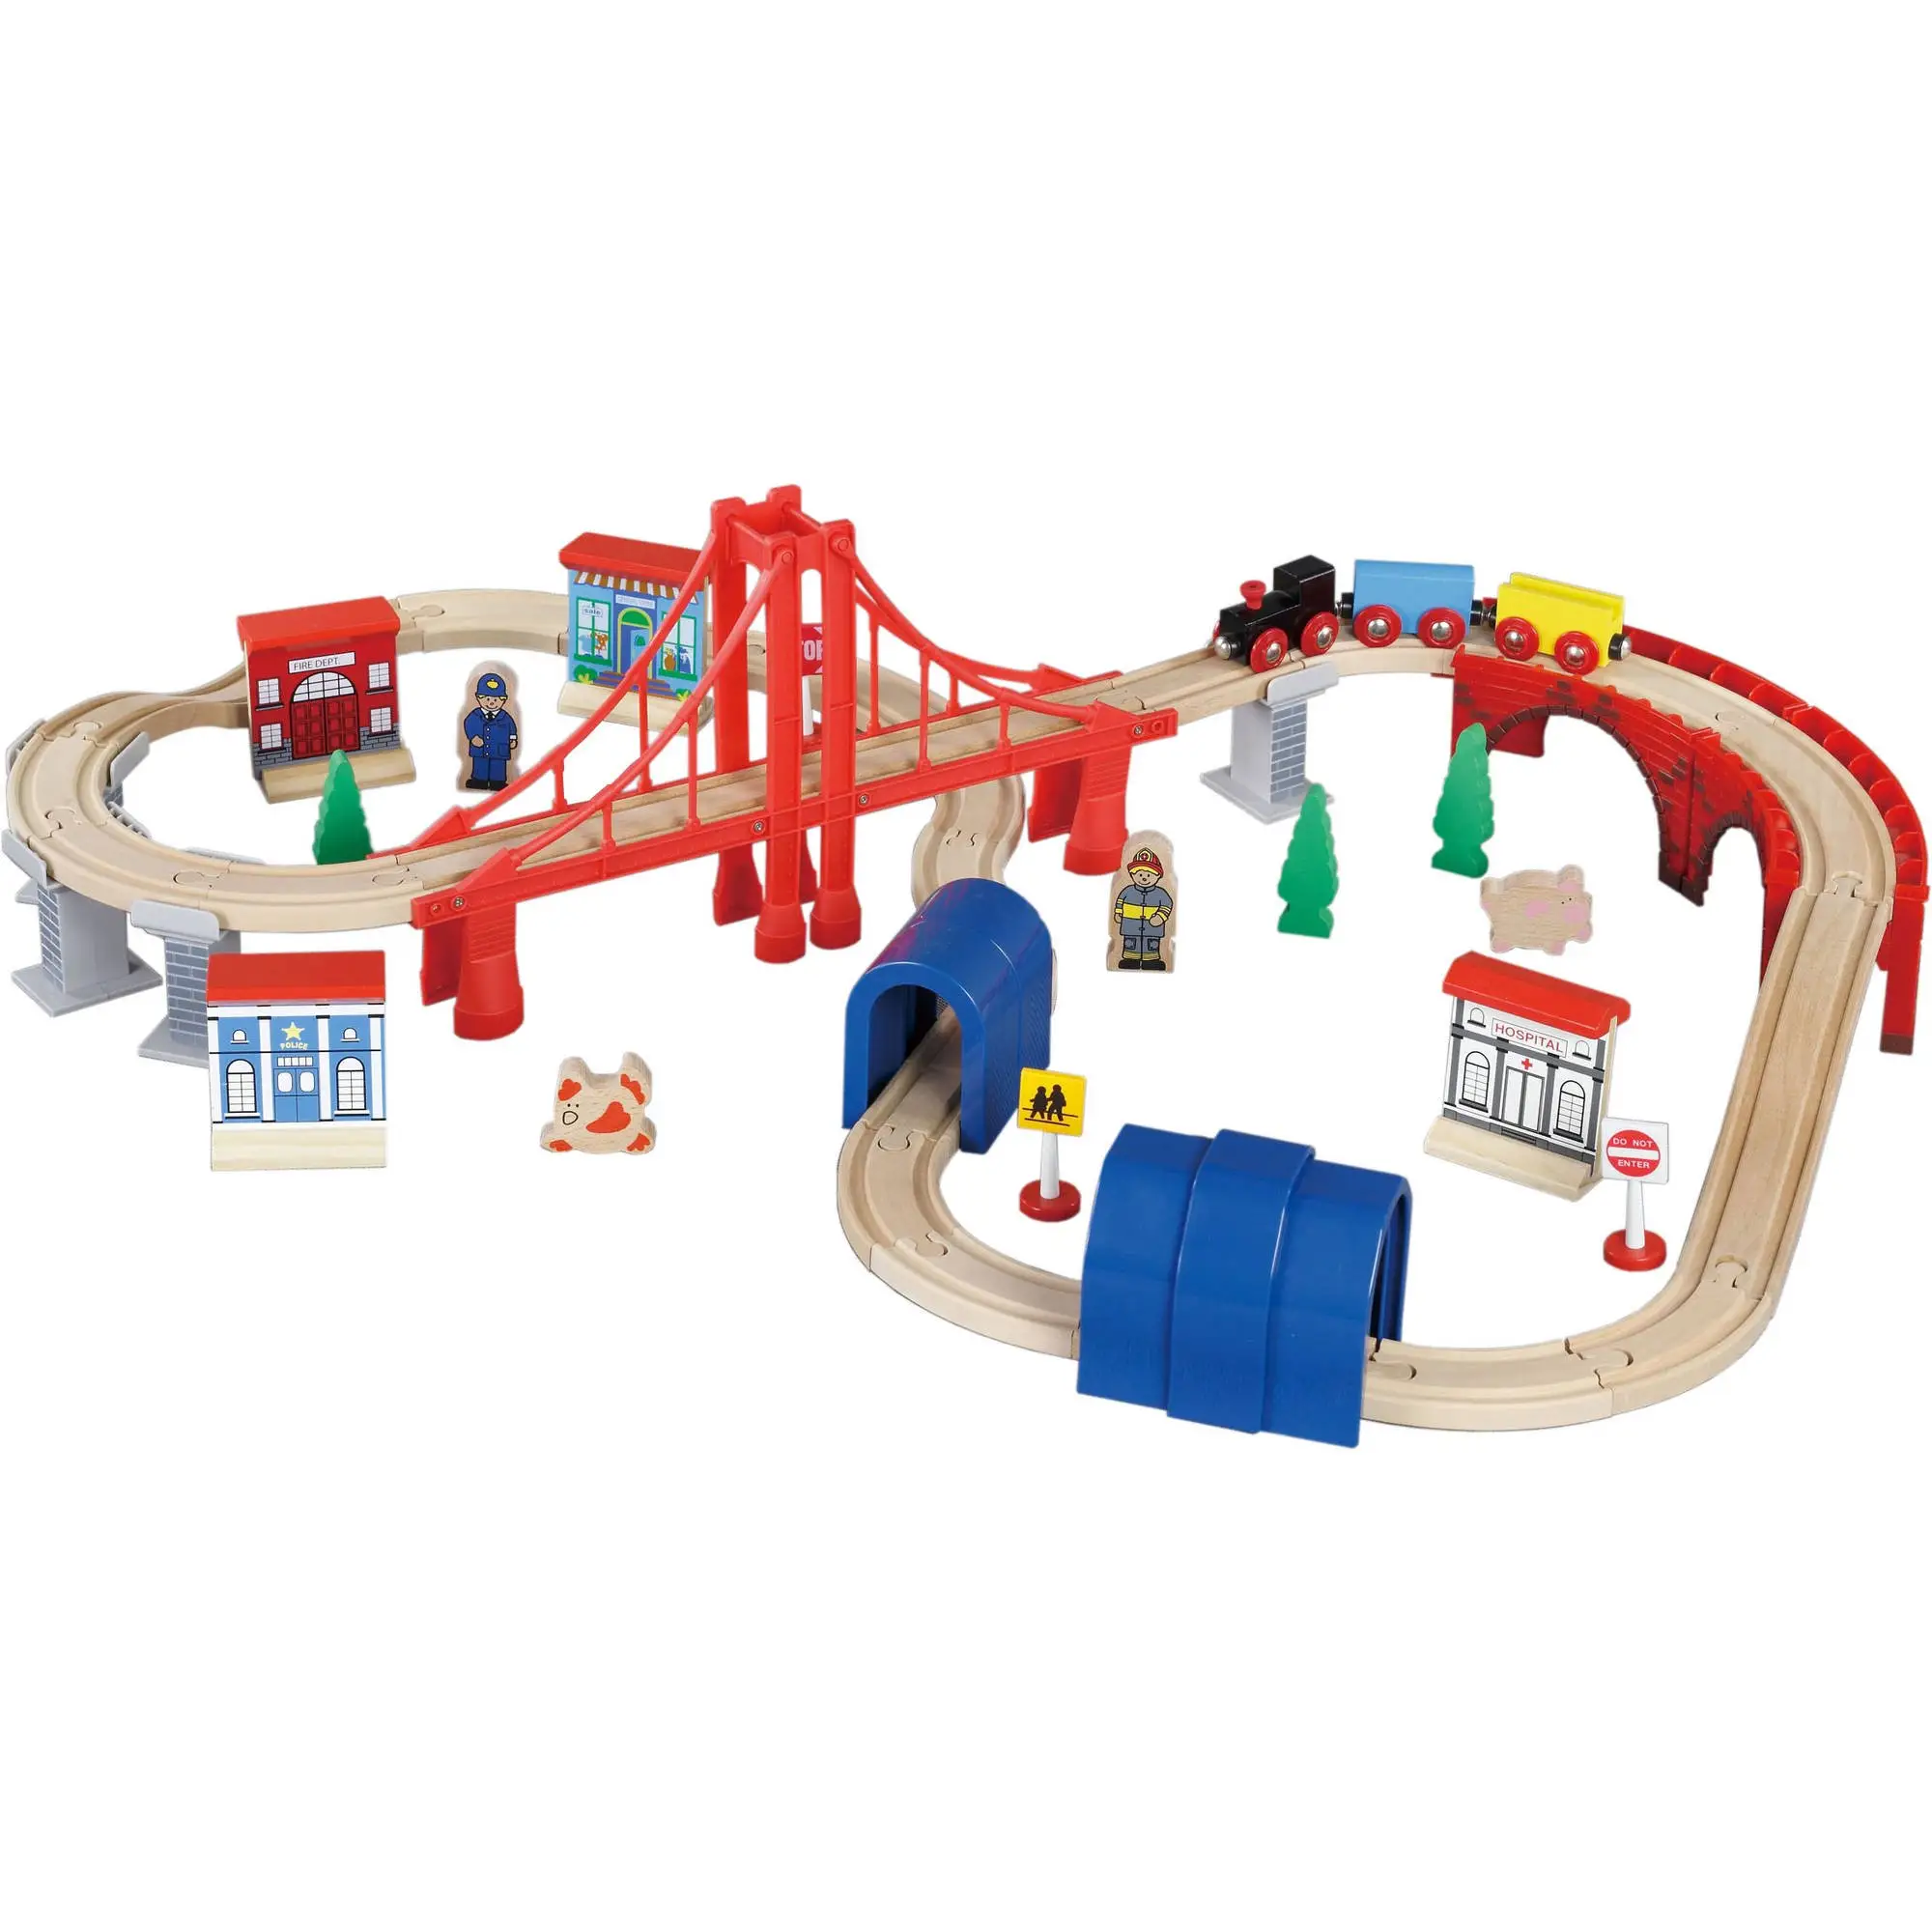 New arrival kids educational 70 pcs accessories building wooden train toy set for toddler train toy